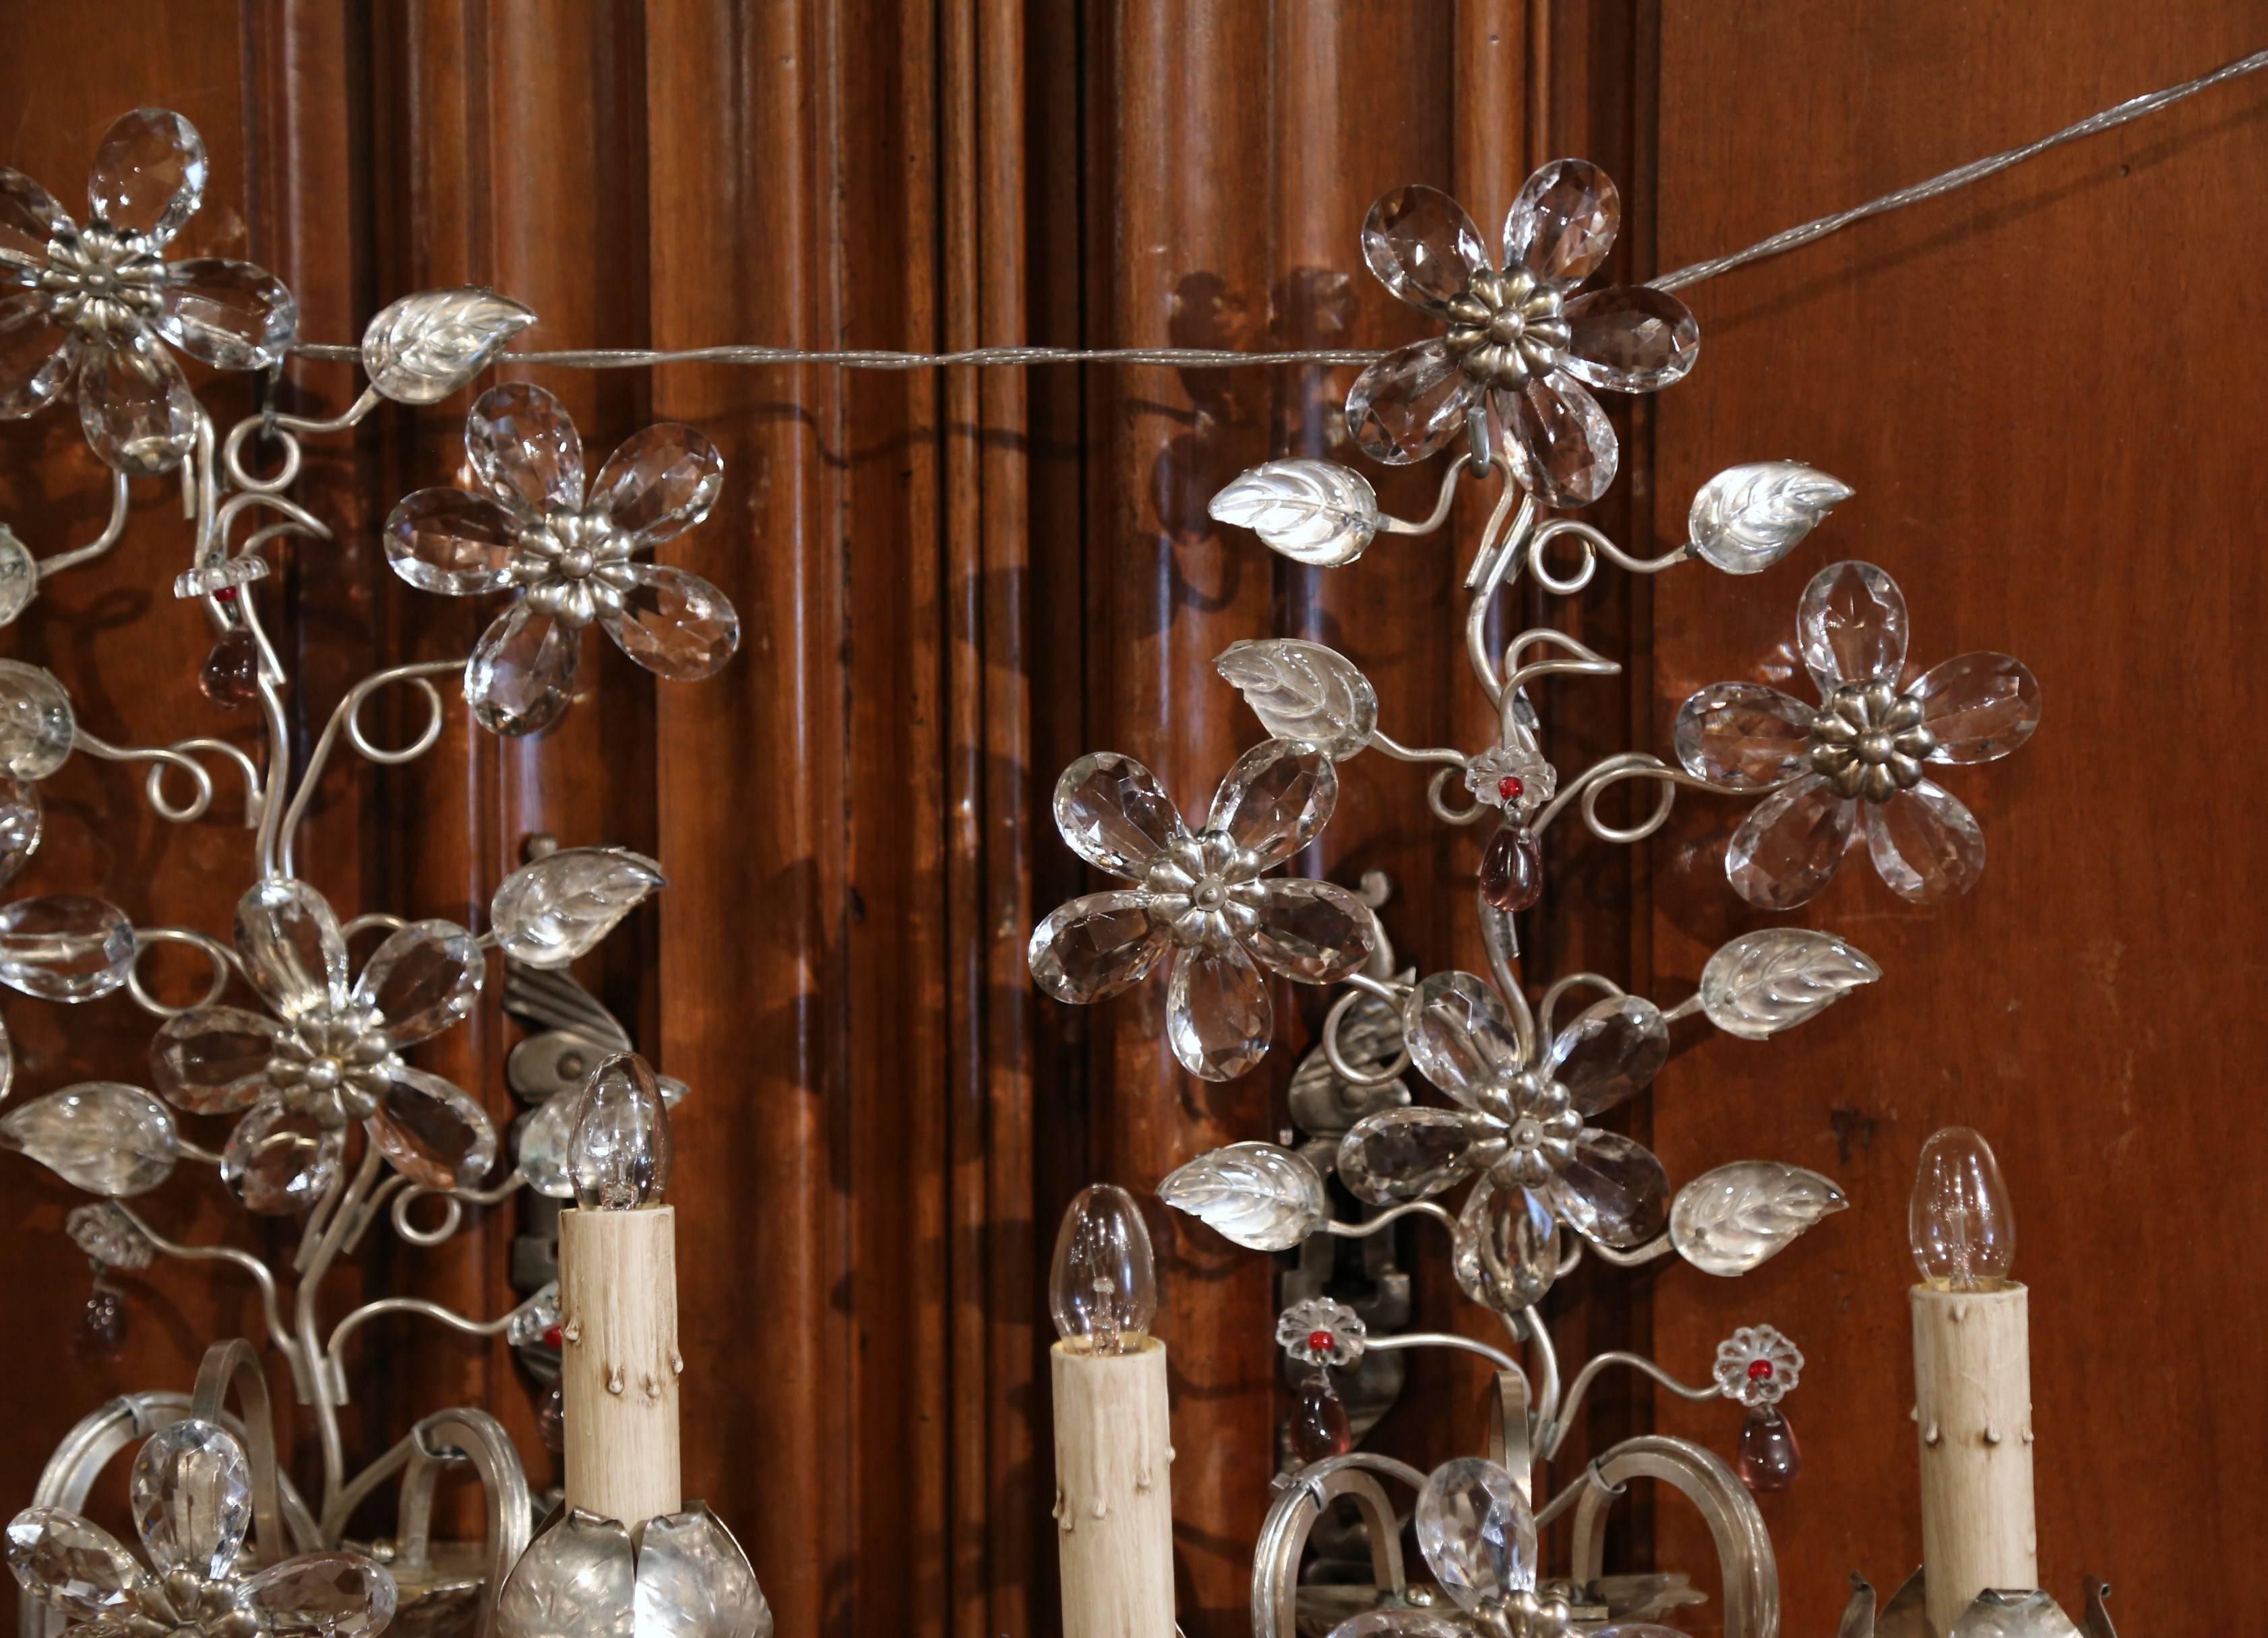 This pair of elegant, vintage Bagues wall lights were created in Paris, France, circa 1950. Each of the elaborate sconces has two lights and features shaped crystal flowers and leaves with silver leaf detail. Both fixtures are in excellent condition